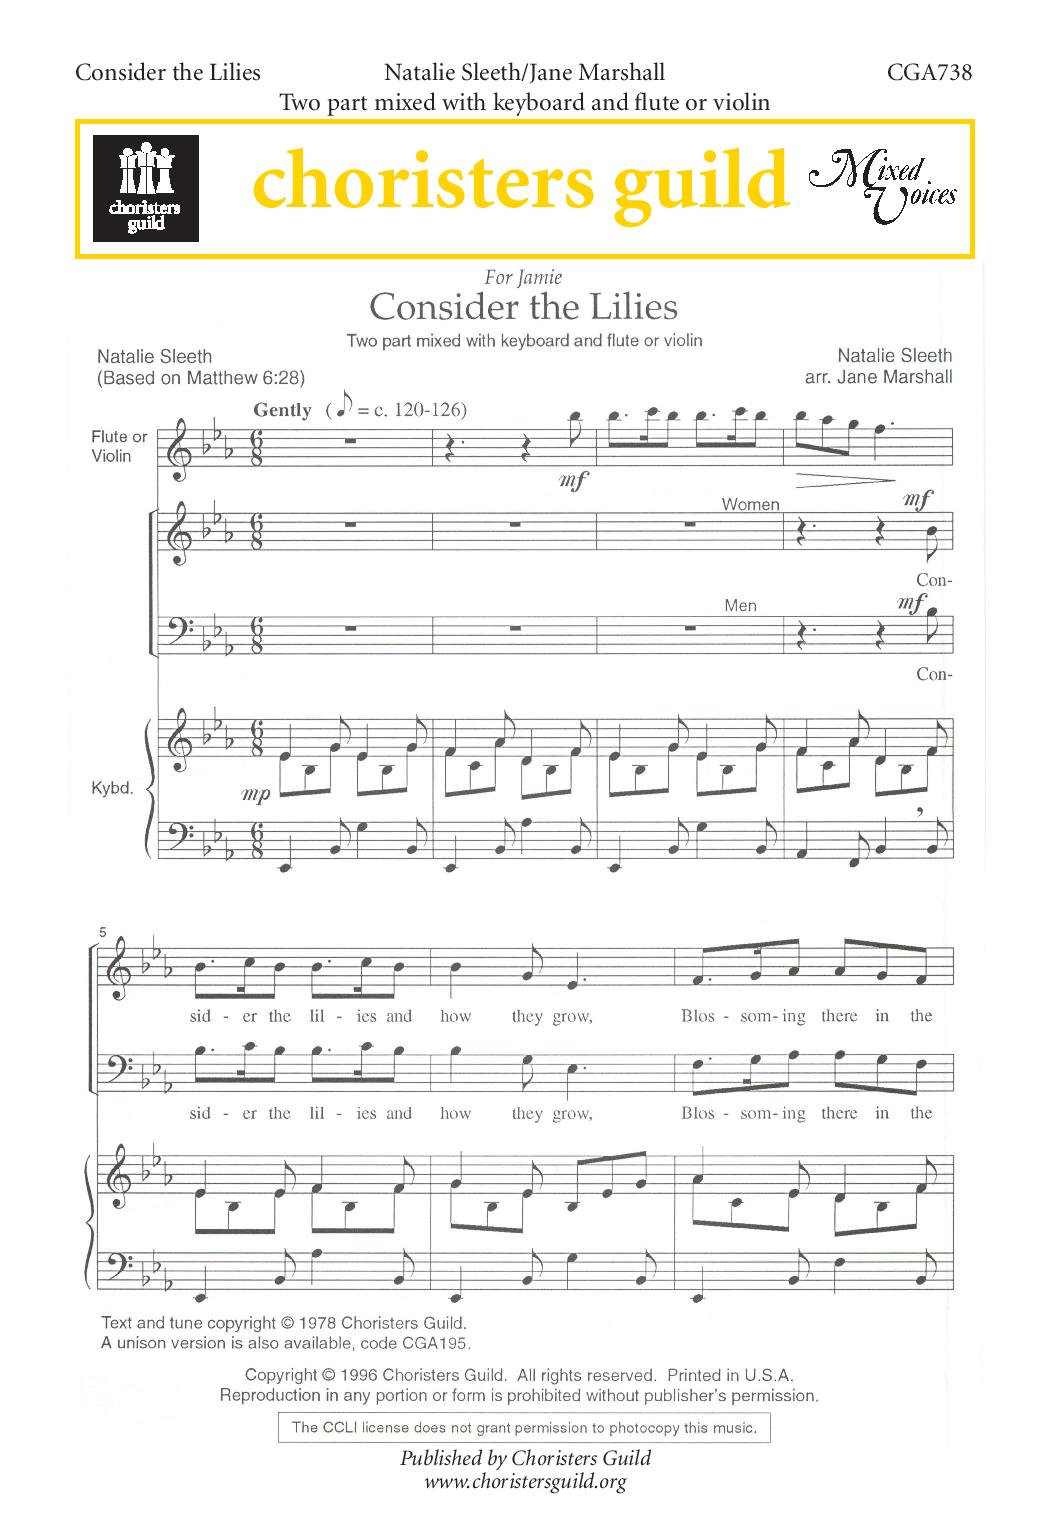 Consider the Lilies (2 part mixed)